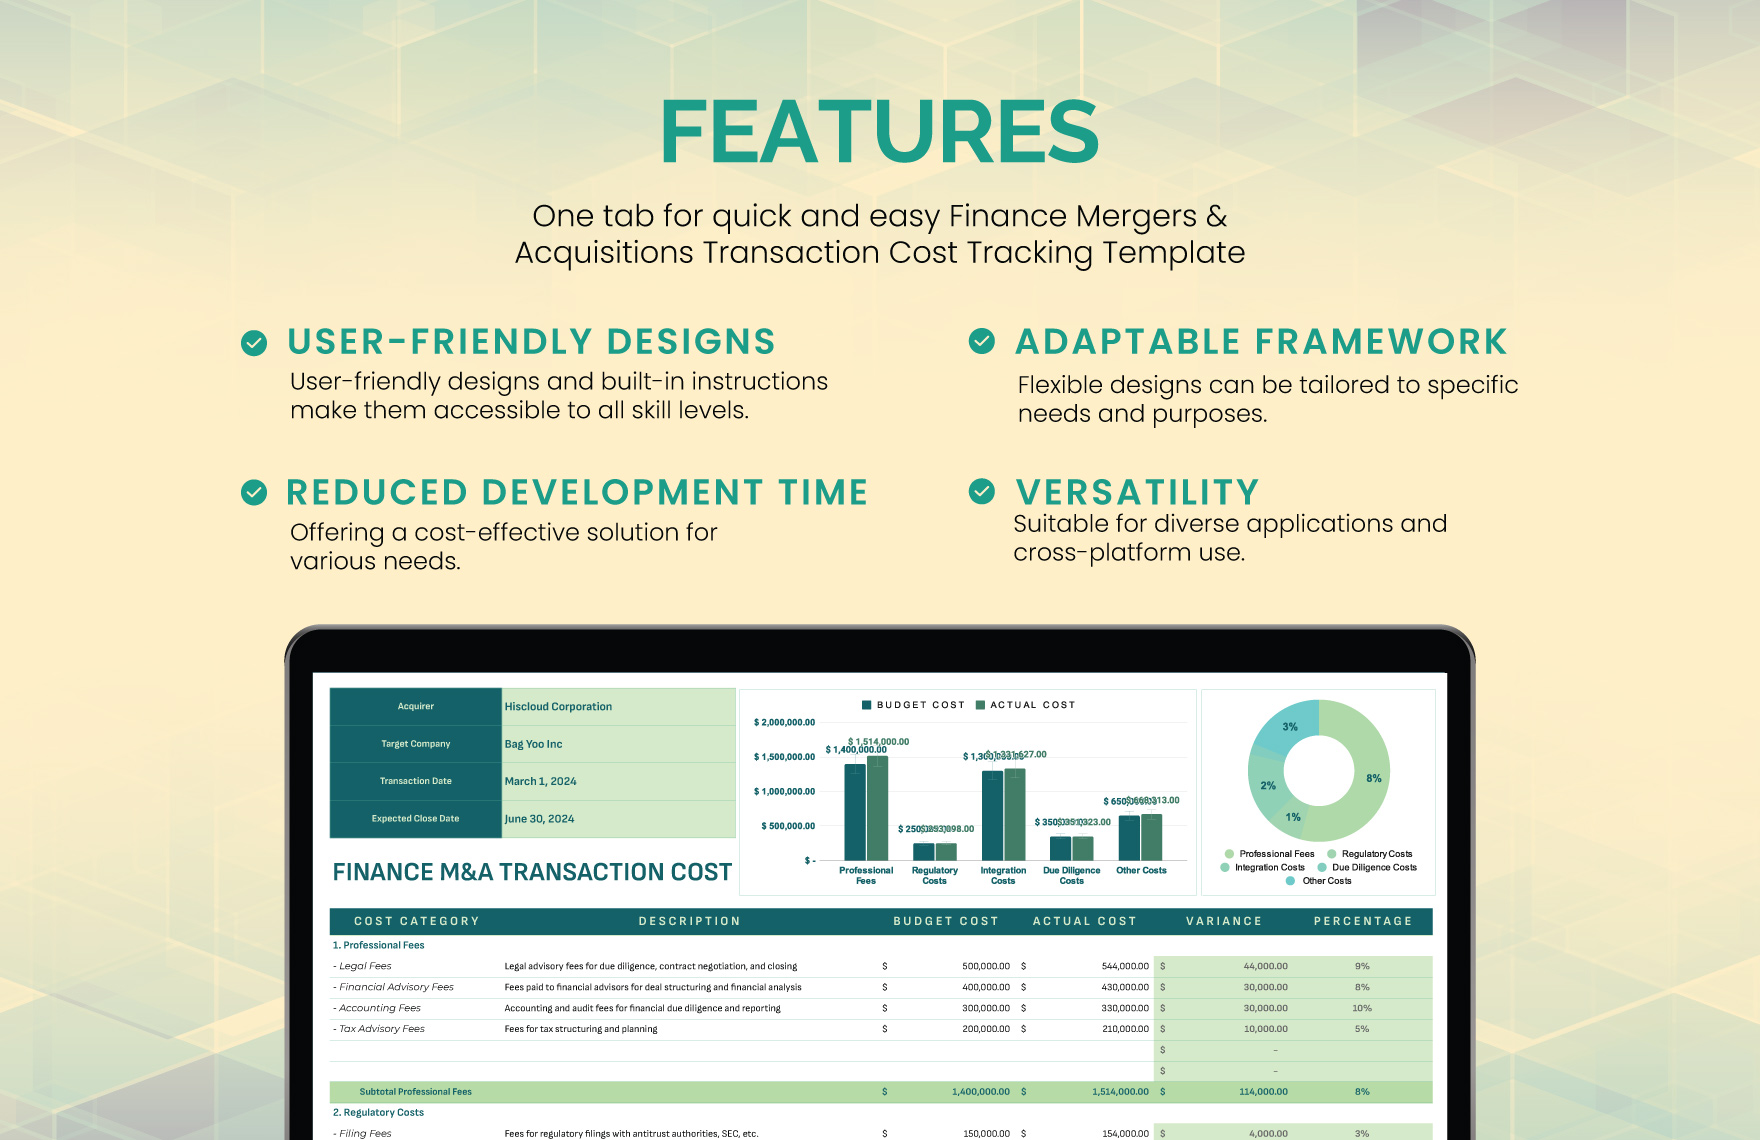 Finance Mergers & Acquisitions Transaction Cost Tracking Template